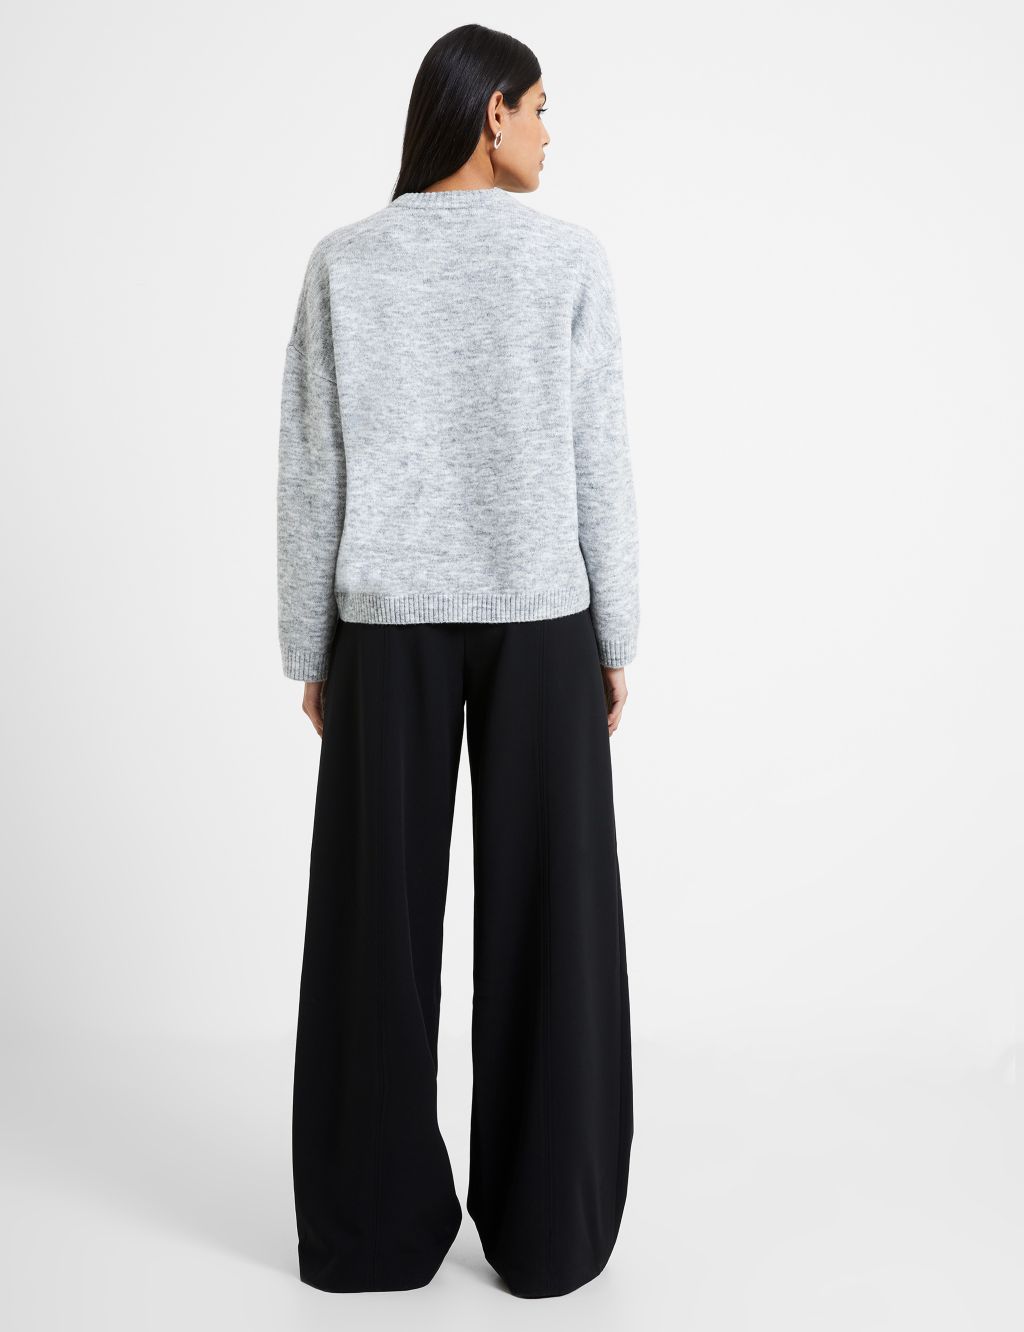 Buy Crew Neck Jumper | French Connection | M&S